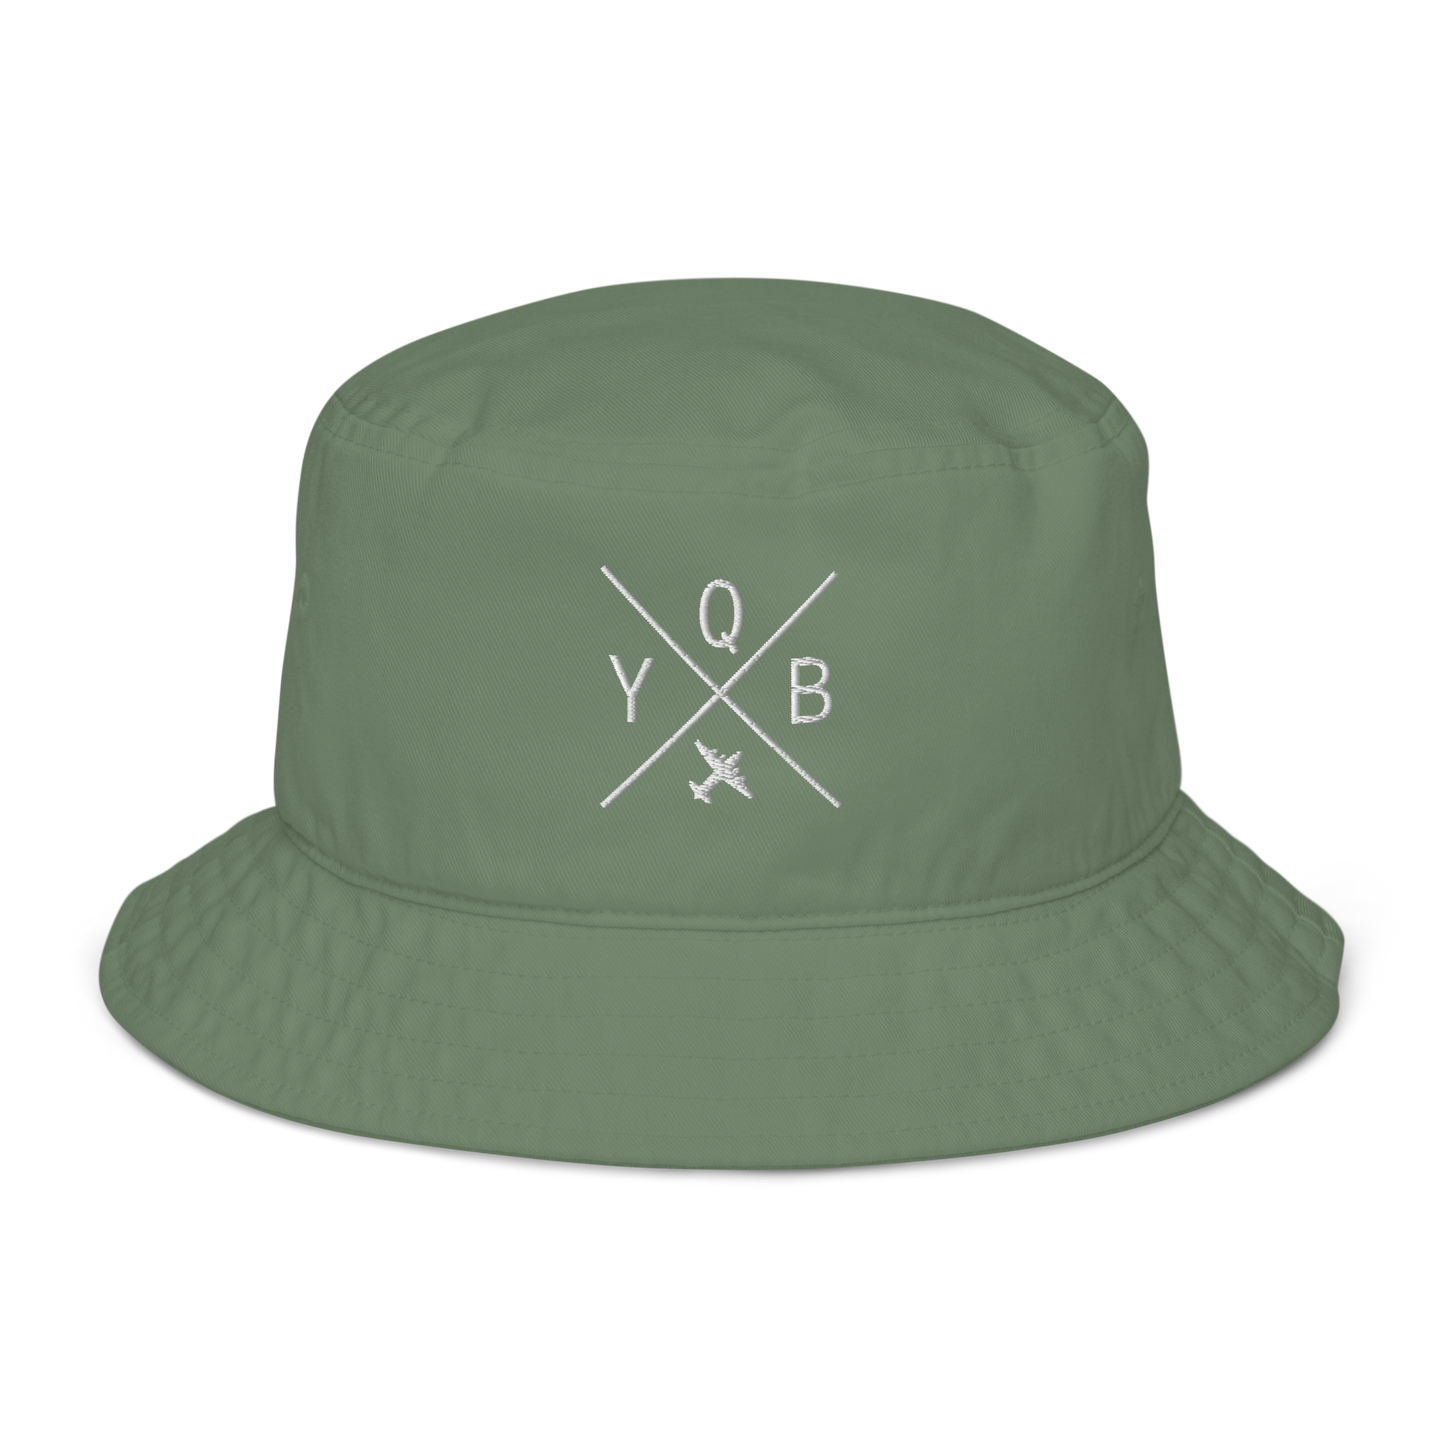 YHM Designs - YQB Quebec City Organic Cotton Bucket Hat - Crossed-X Design with Airport Code and Vintage Propliner - White Embroidery - Image 06